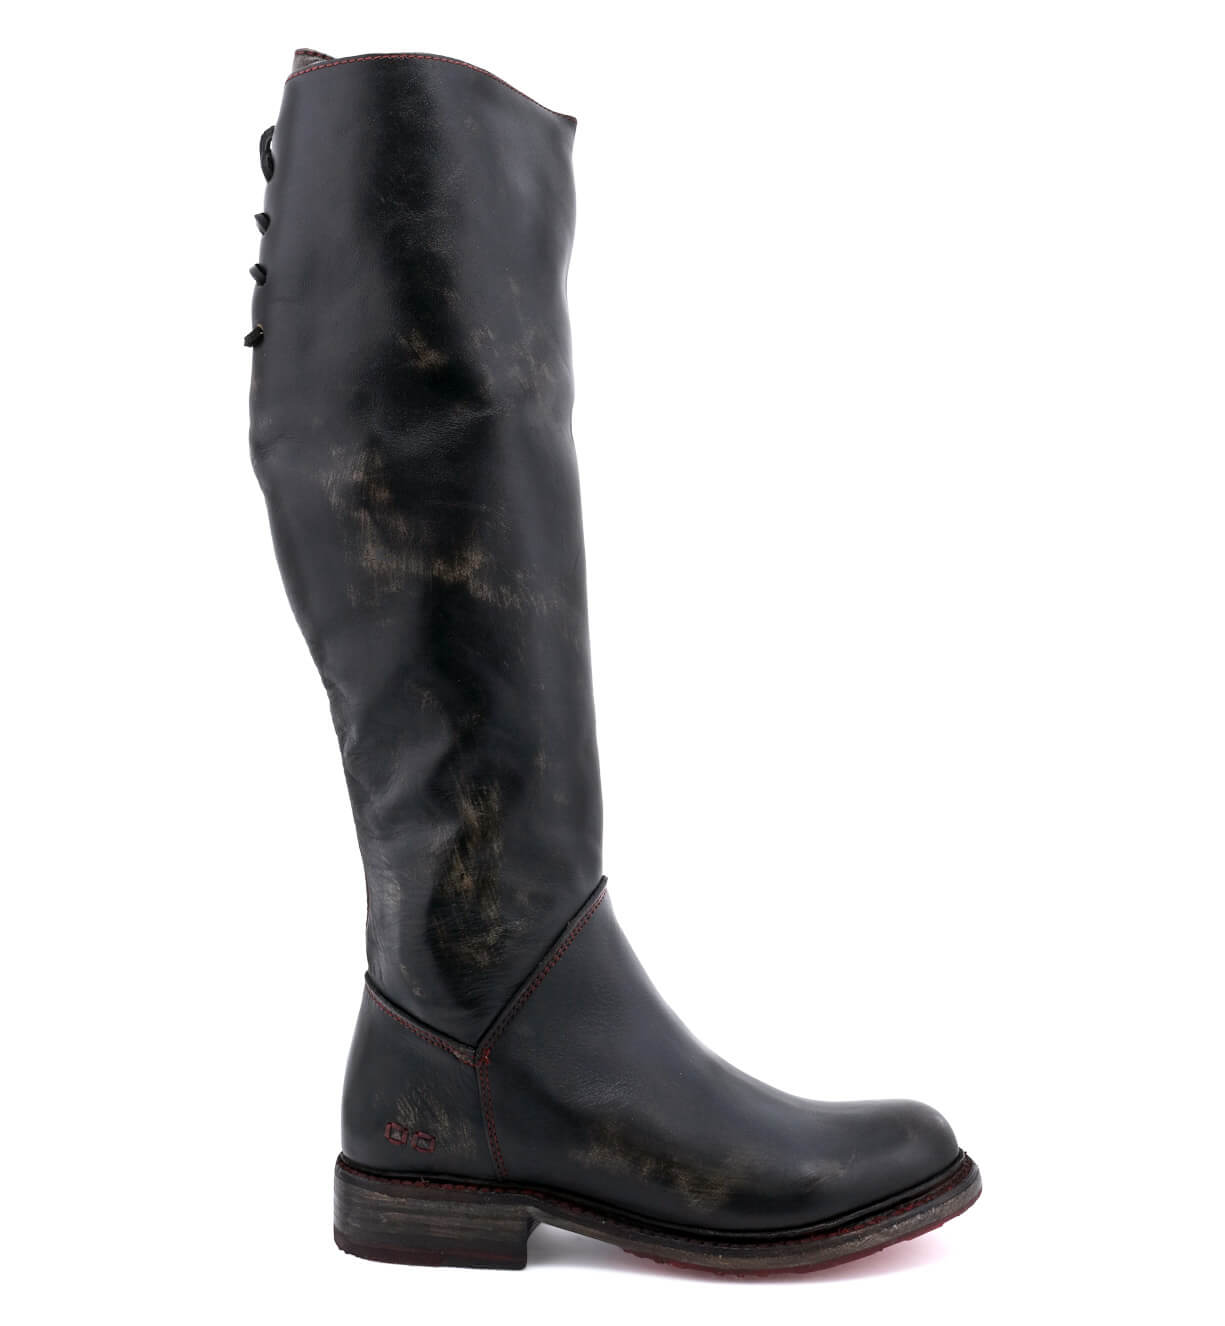 A women's Manchester boot by Bed Stu with a red sole.